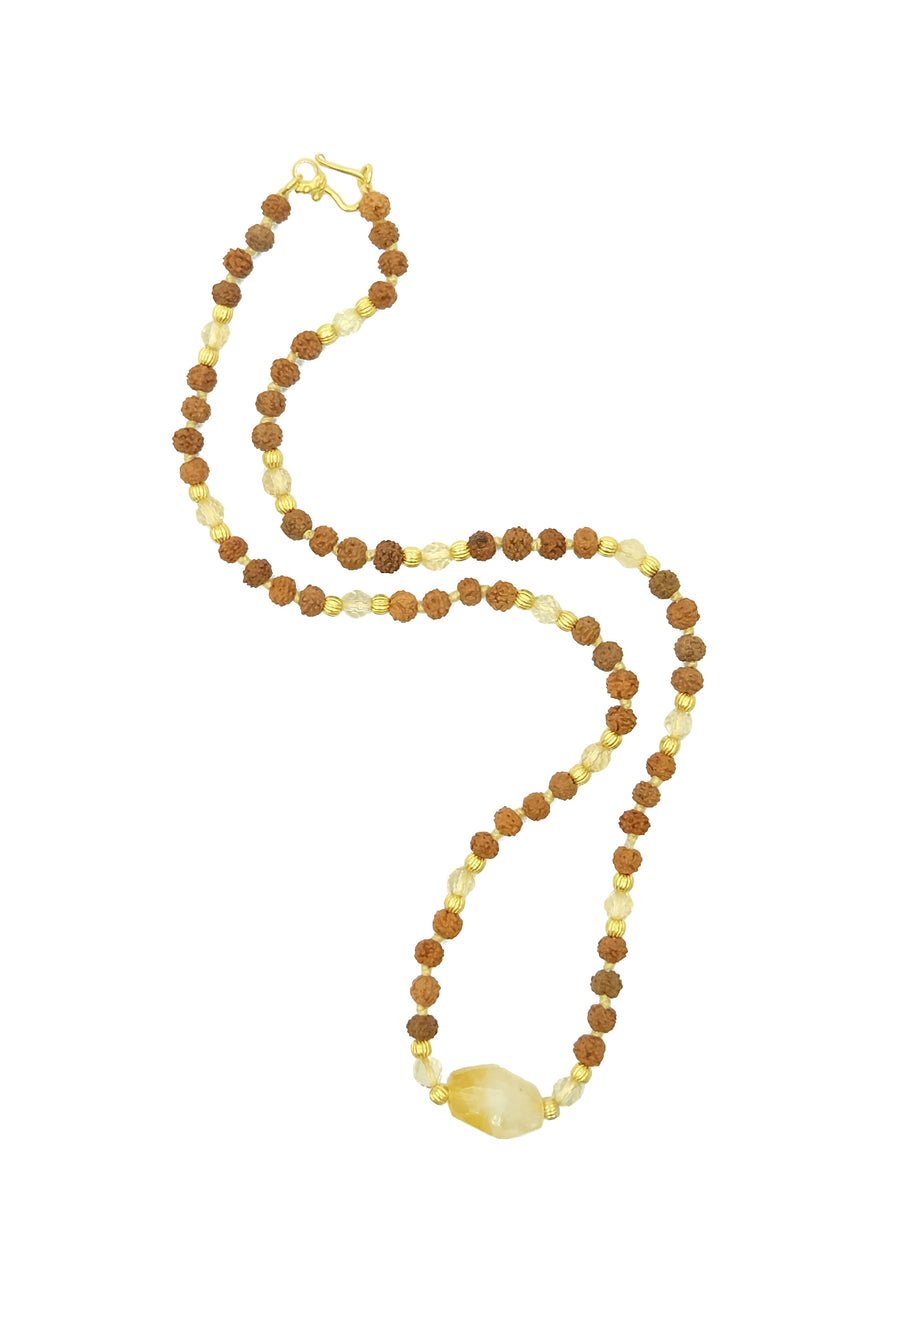 Golden Aura choker length necklace is hand-made from rudraksha seeds, citrine and 22k gold accents. 